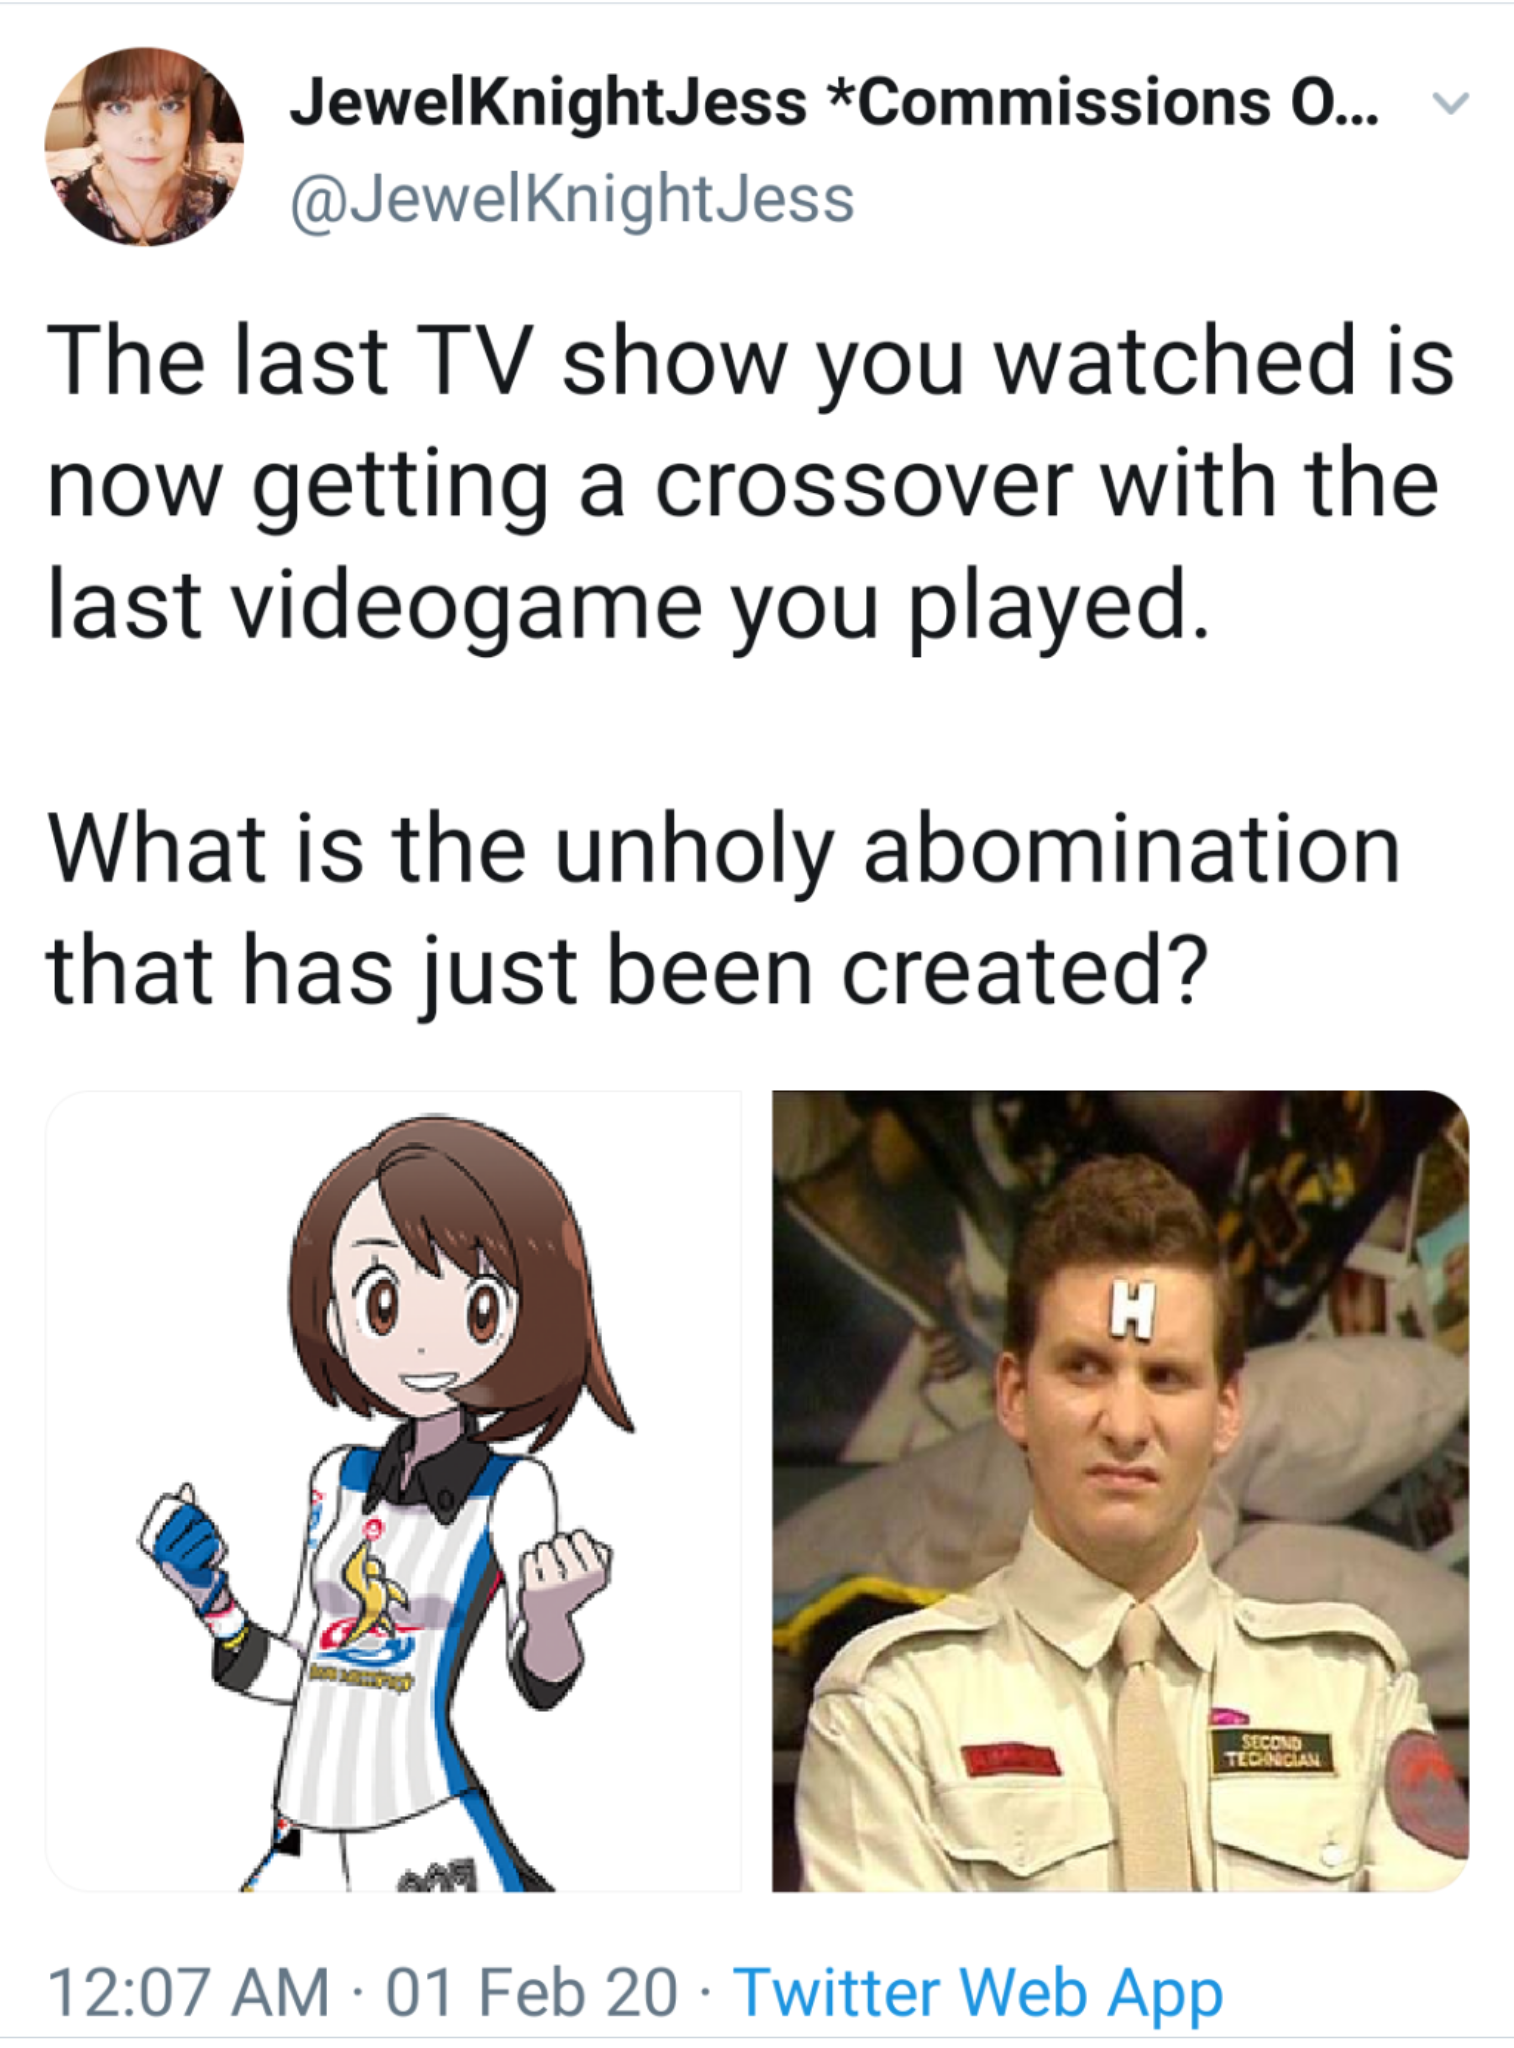 JewelKnightJess Commissions O... The last Tv show you watched is now getting a crossover with the last videogame you played. What is the unholy abomination that has just been created? 01 Feb 20. Twitter Web App